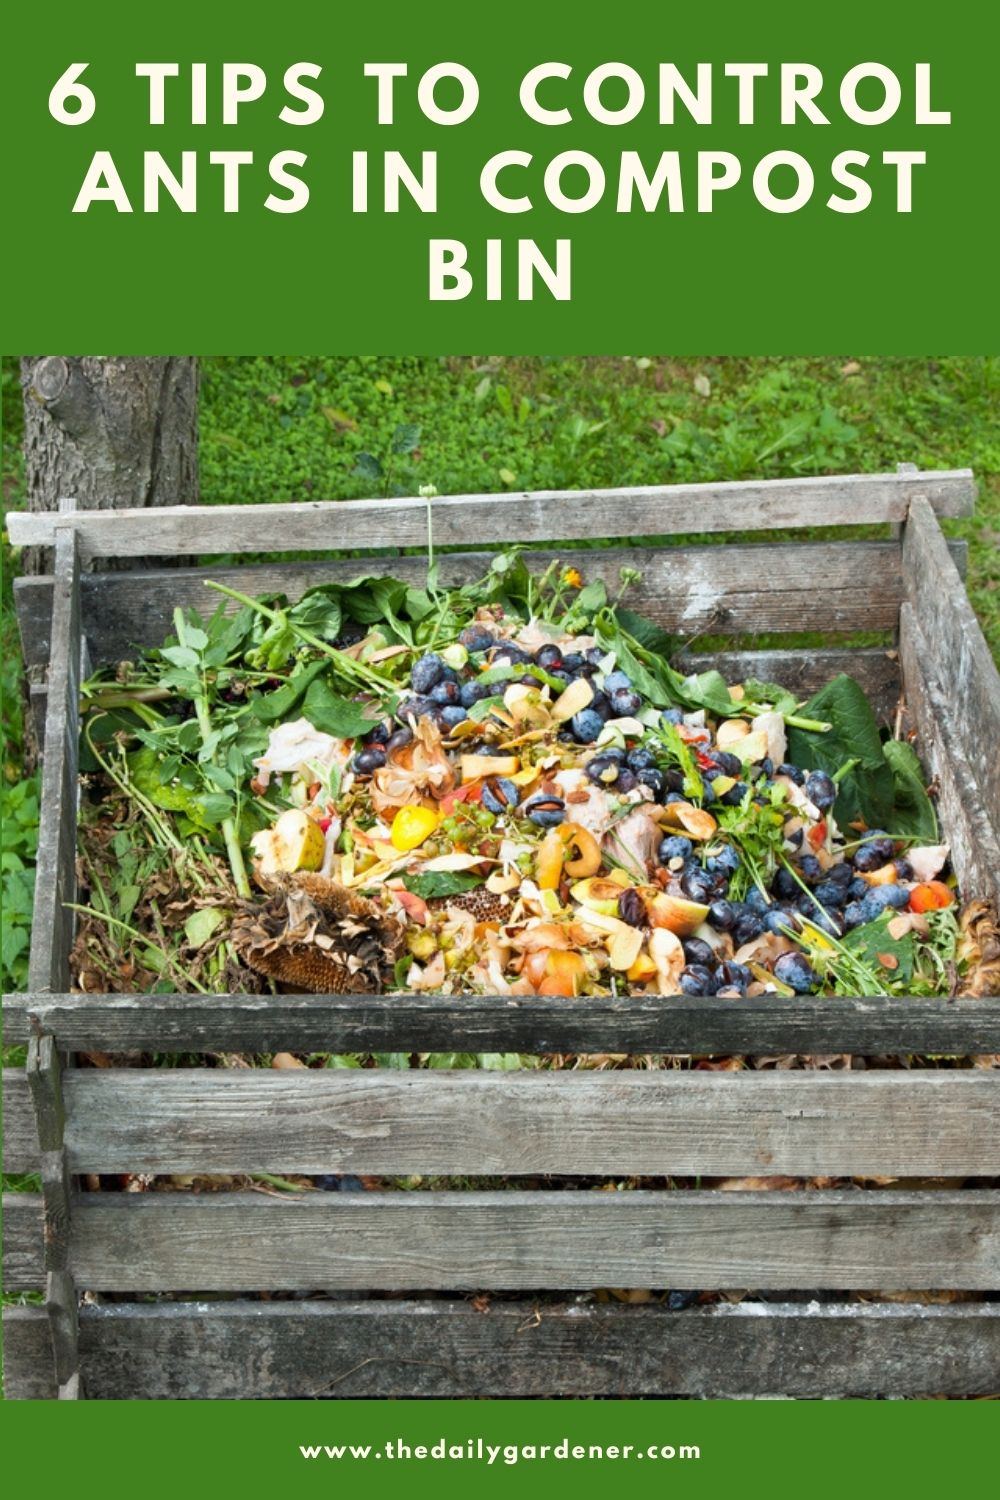 6 Tips to Control Ants in Compost Bin 2